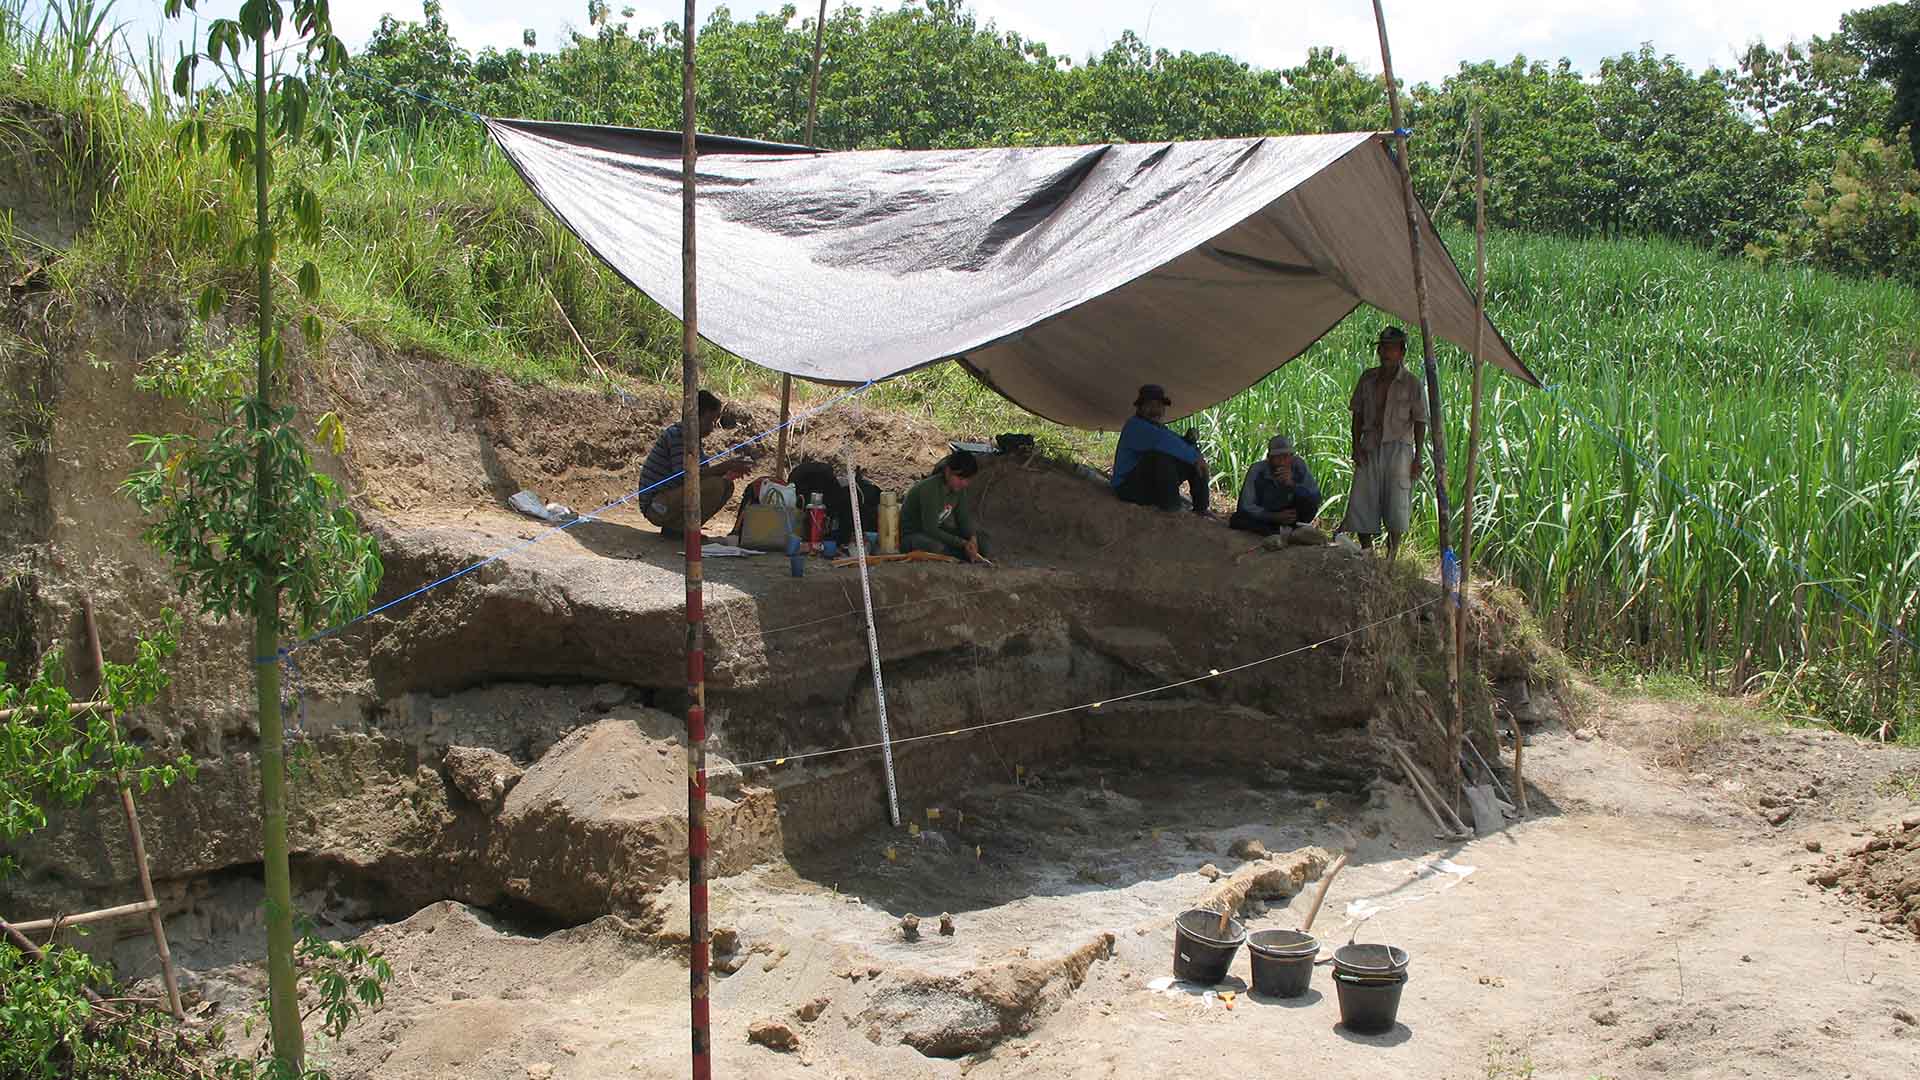 Archaeology dig site at Sembungan in Central Java, Indonesia